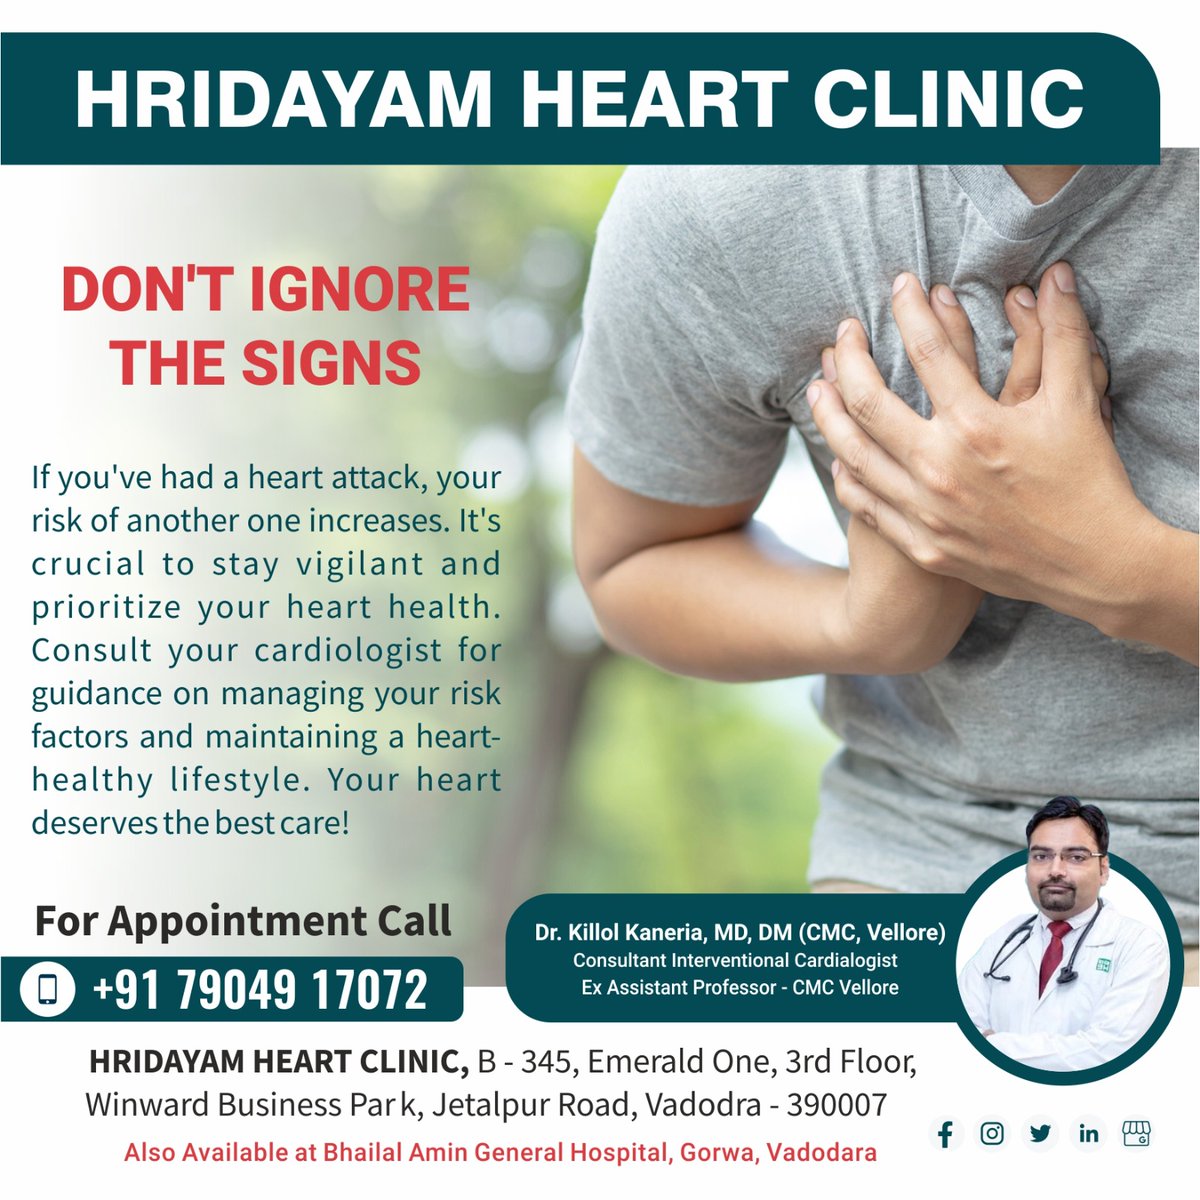 Listen to your heart, because it's speaking volumes. Ignoring the signs after a heart attack isn't an option. Take charge of your heart health, consult your cardiologist, and prioritize self-care. Your heart deserves nothing but the best.

#HeartHealth #SelfCare #DrKillolKaneria